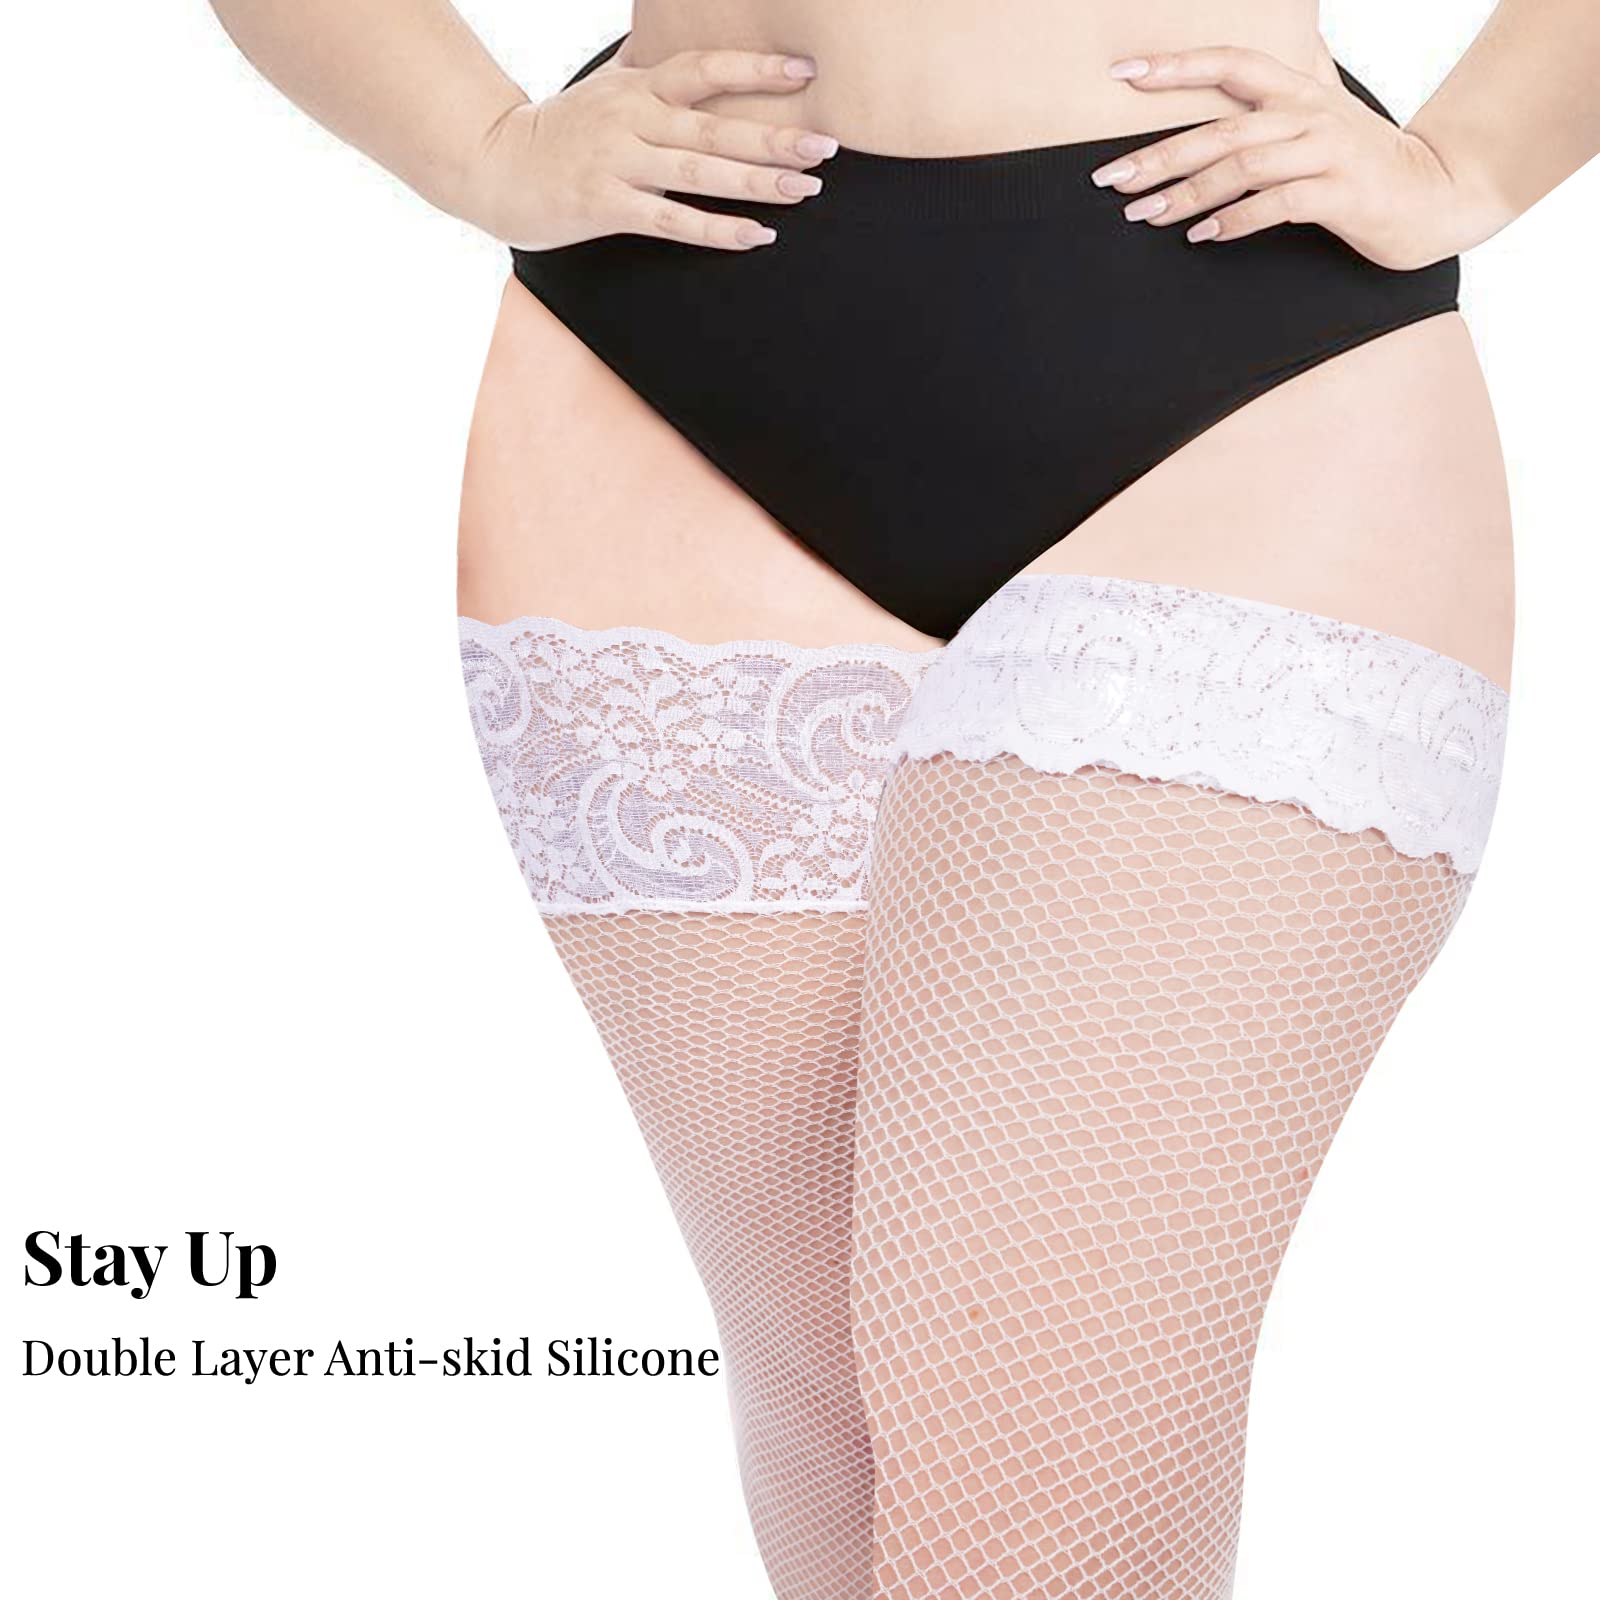 Plus Size Fishnet Stockings Sheer Silicone Lace - White Small Mesh - Moon Wood